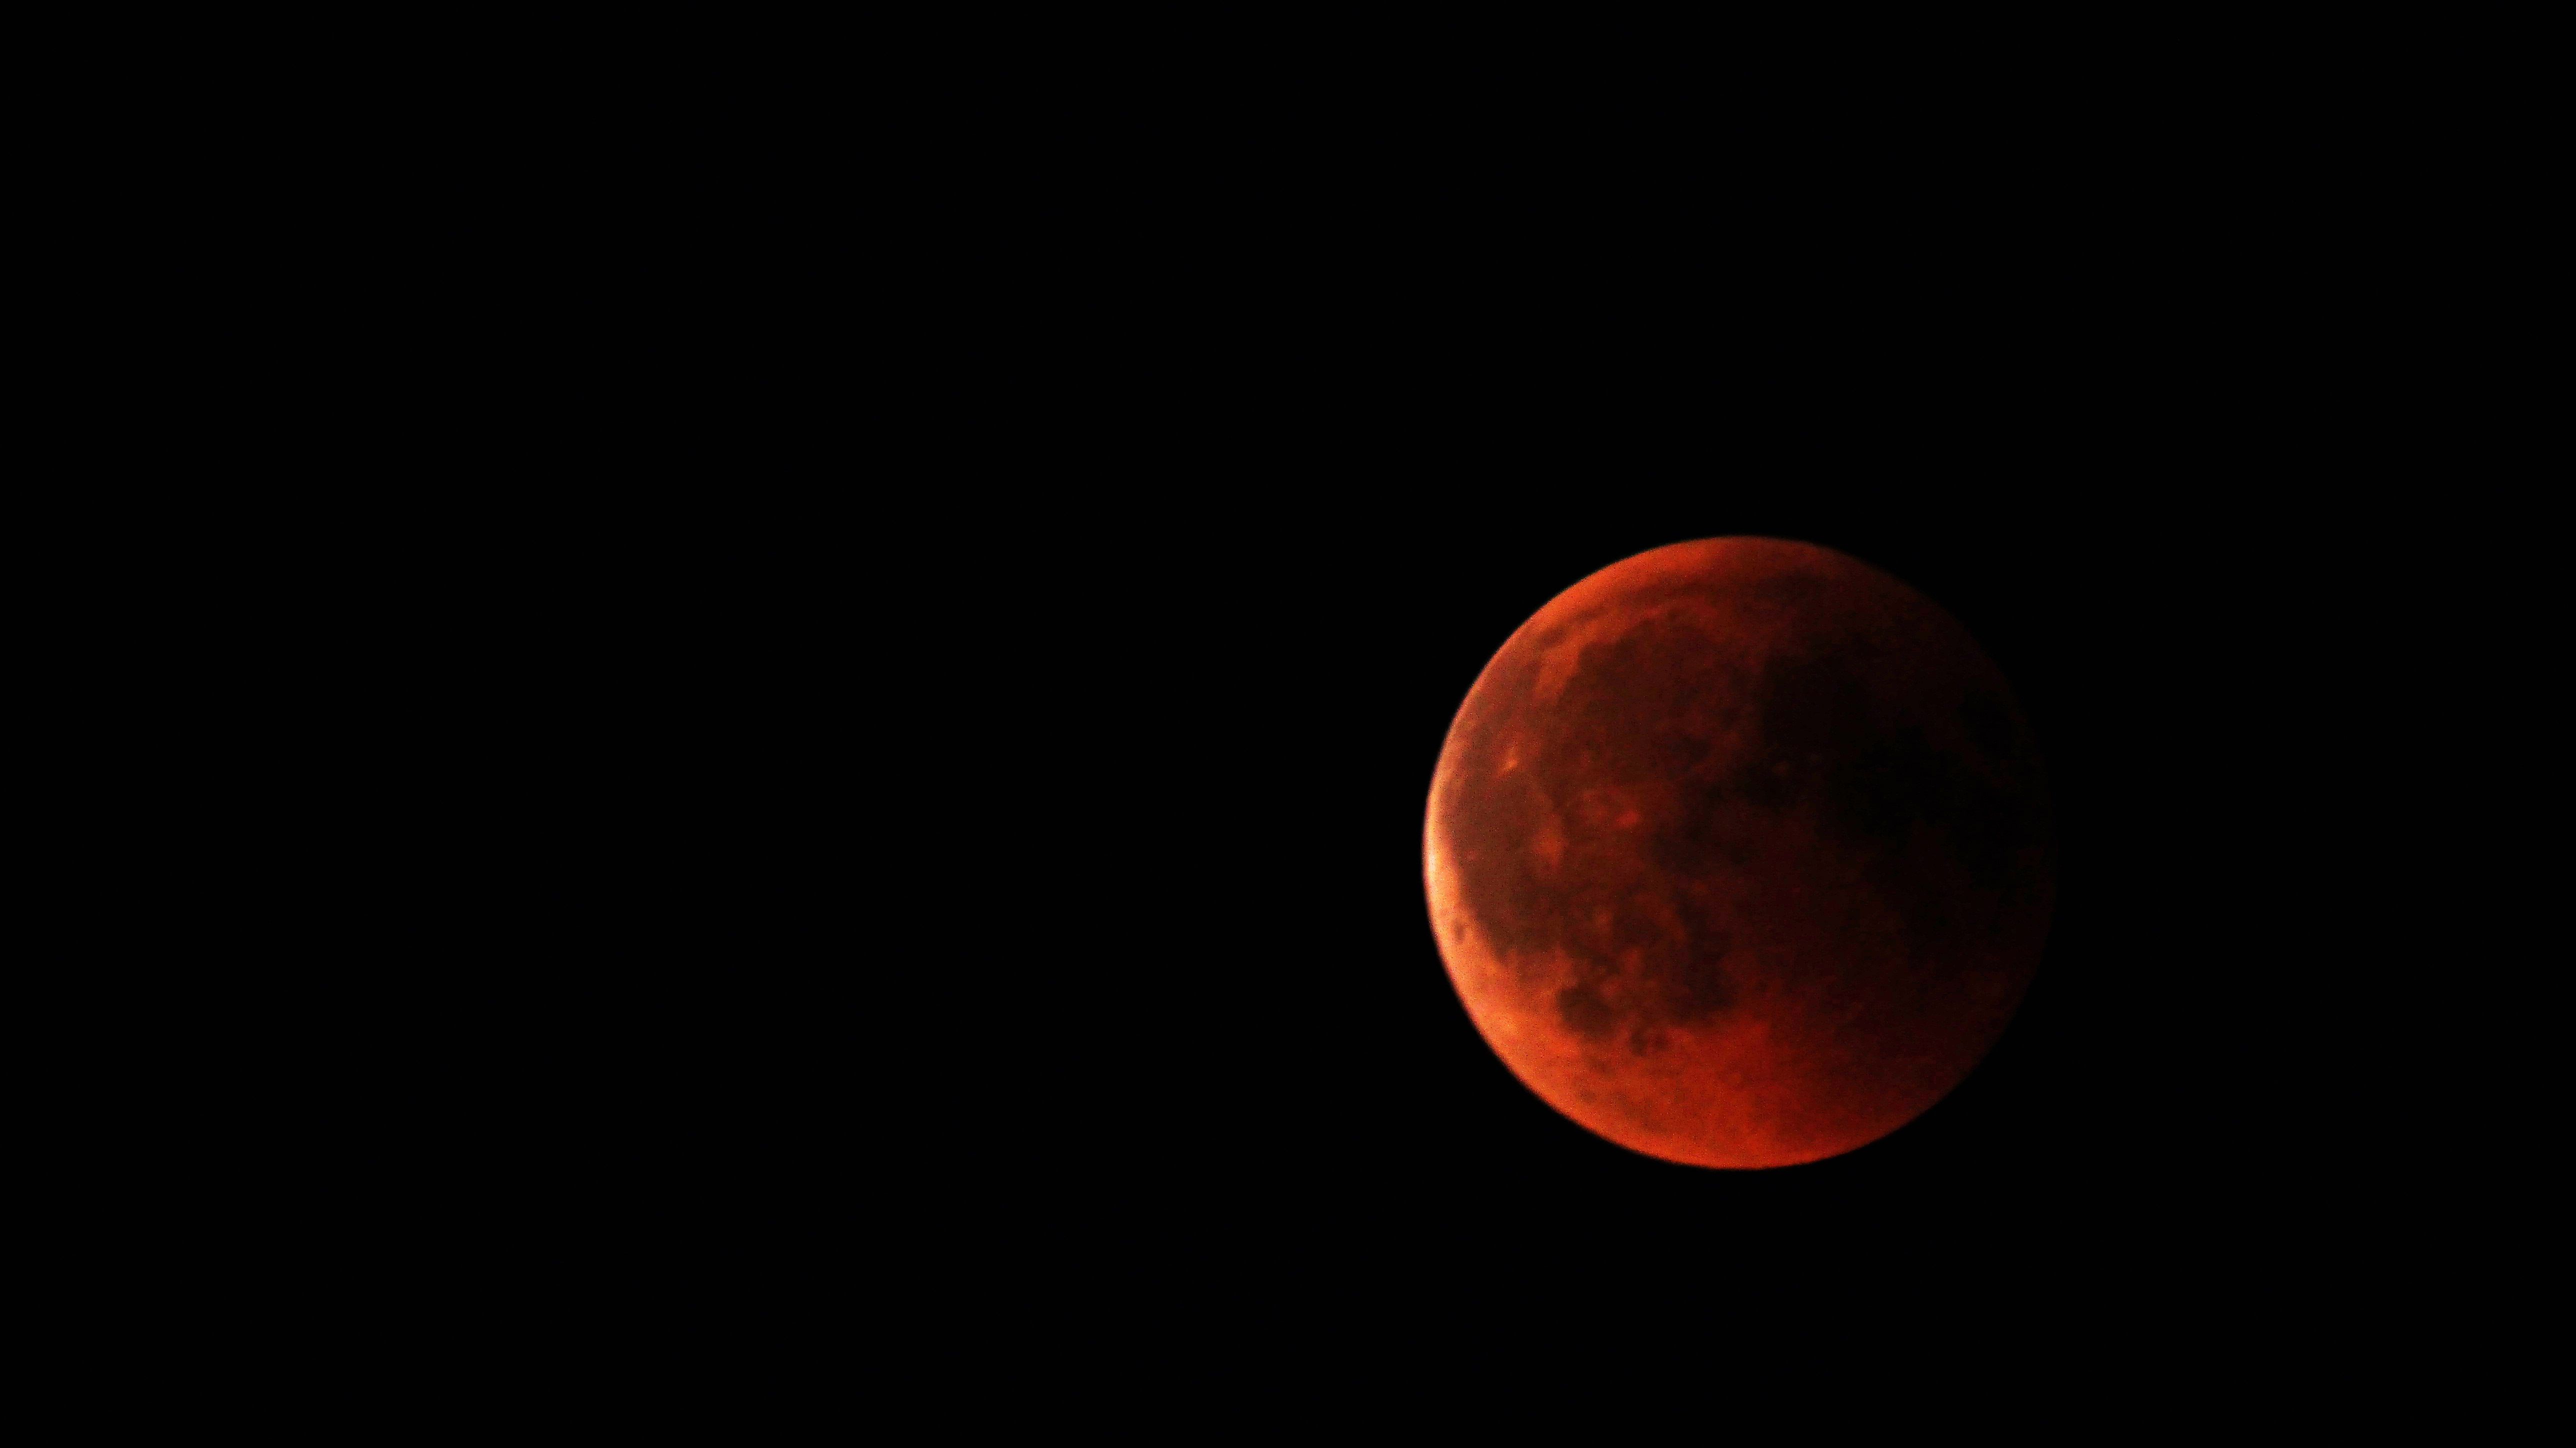 Take a lot of photos of the blood moon as it moves across the sky